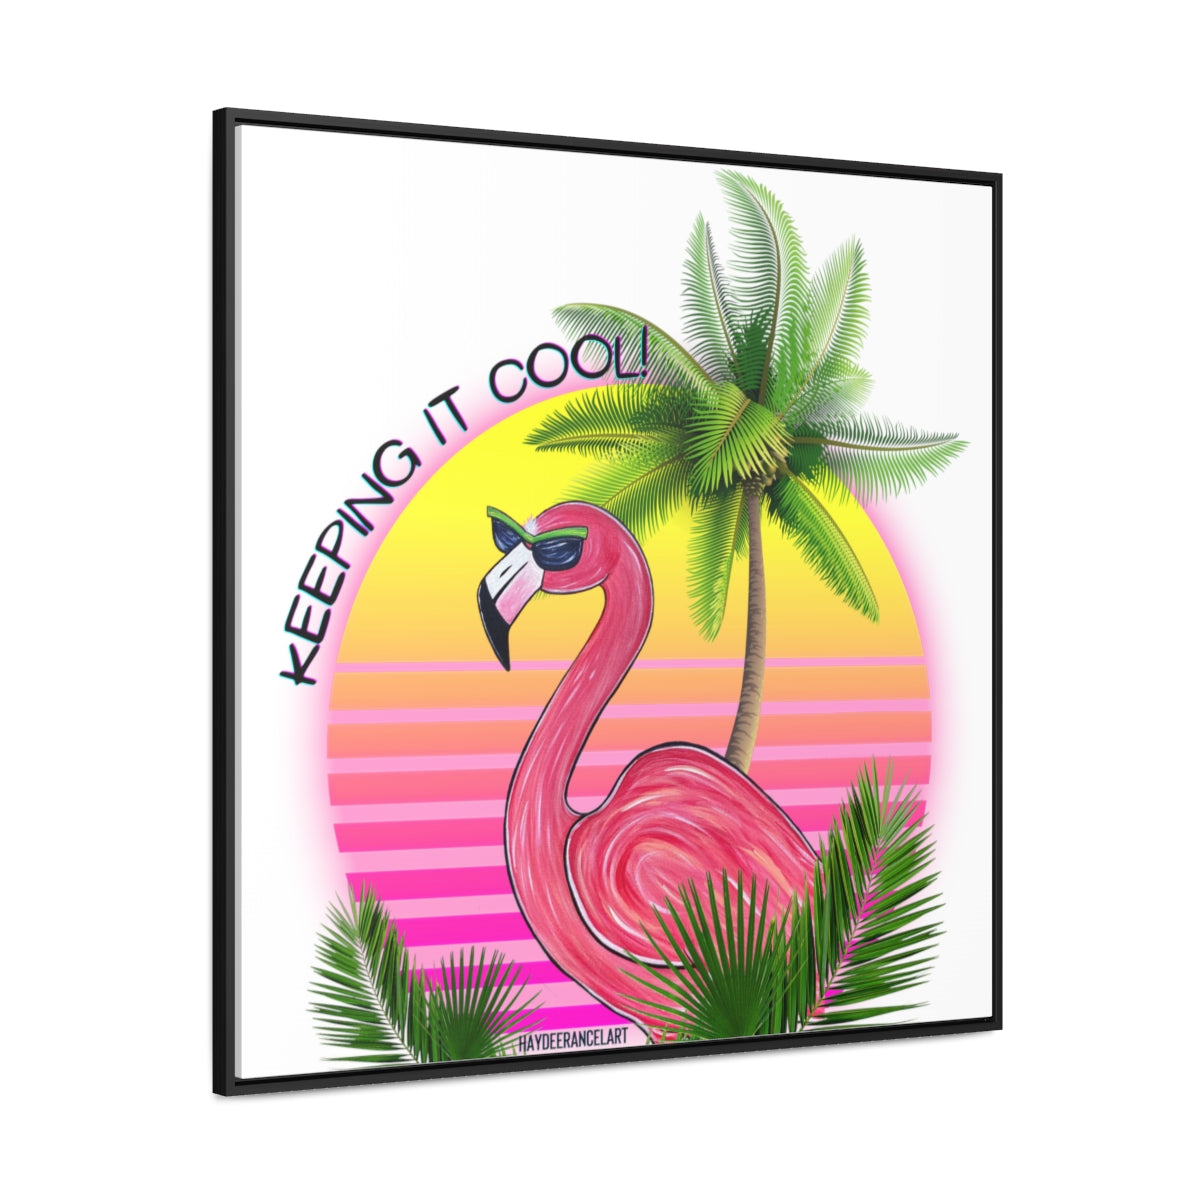 Keeping It Cool Flamingo Beach Sunset Square Framed Gallery Wrapped Canvas Print